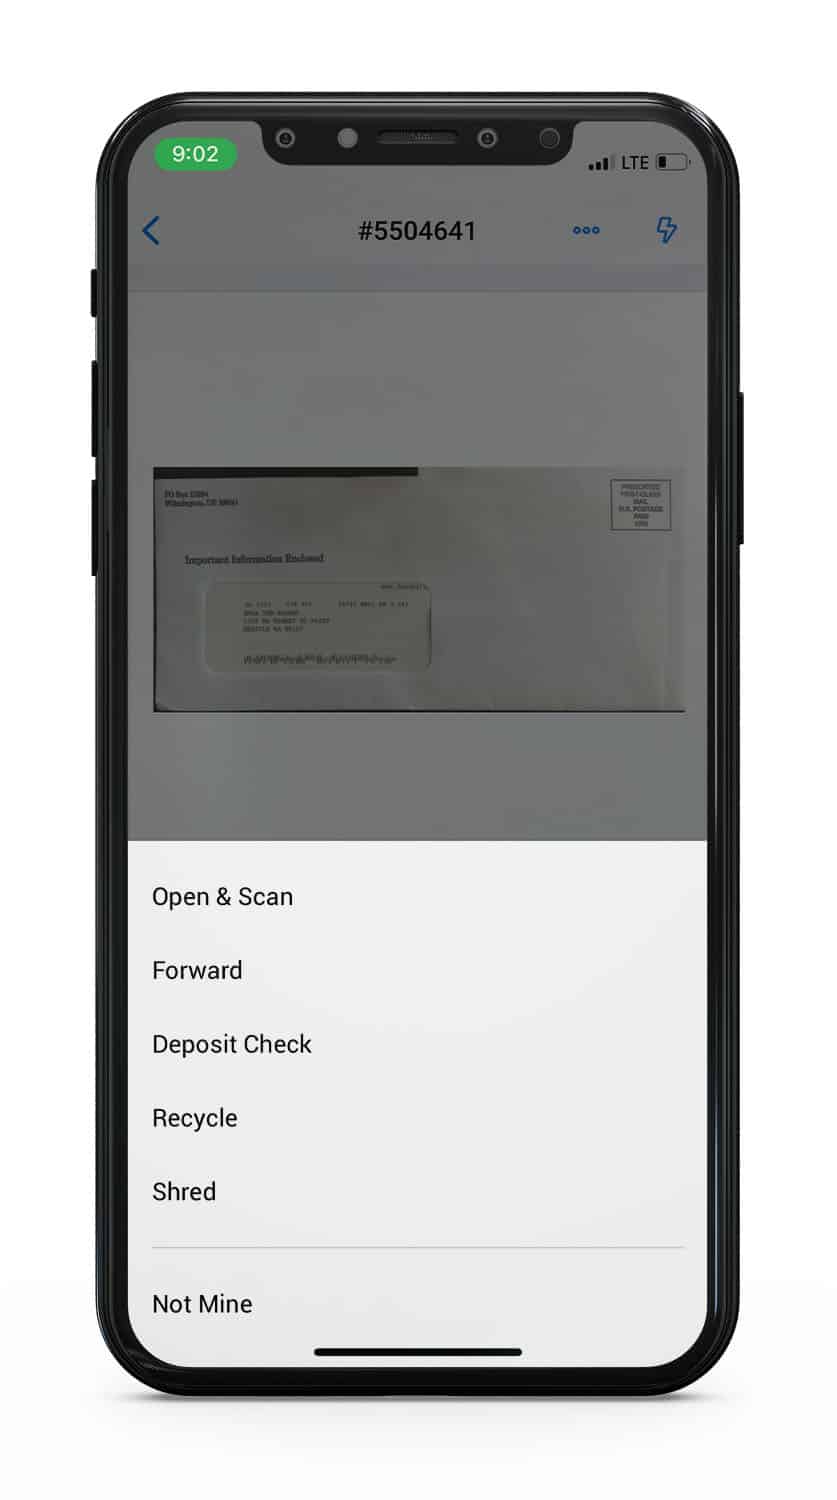 A mockup of an iPhone with the Virtual Mailbox app, showing how to get mail on the road.